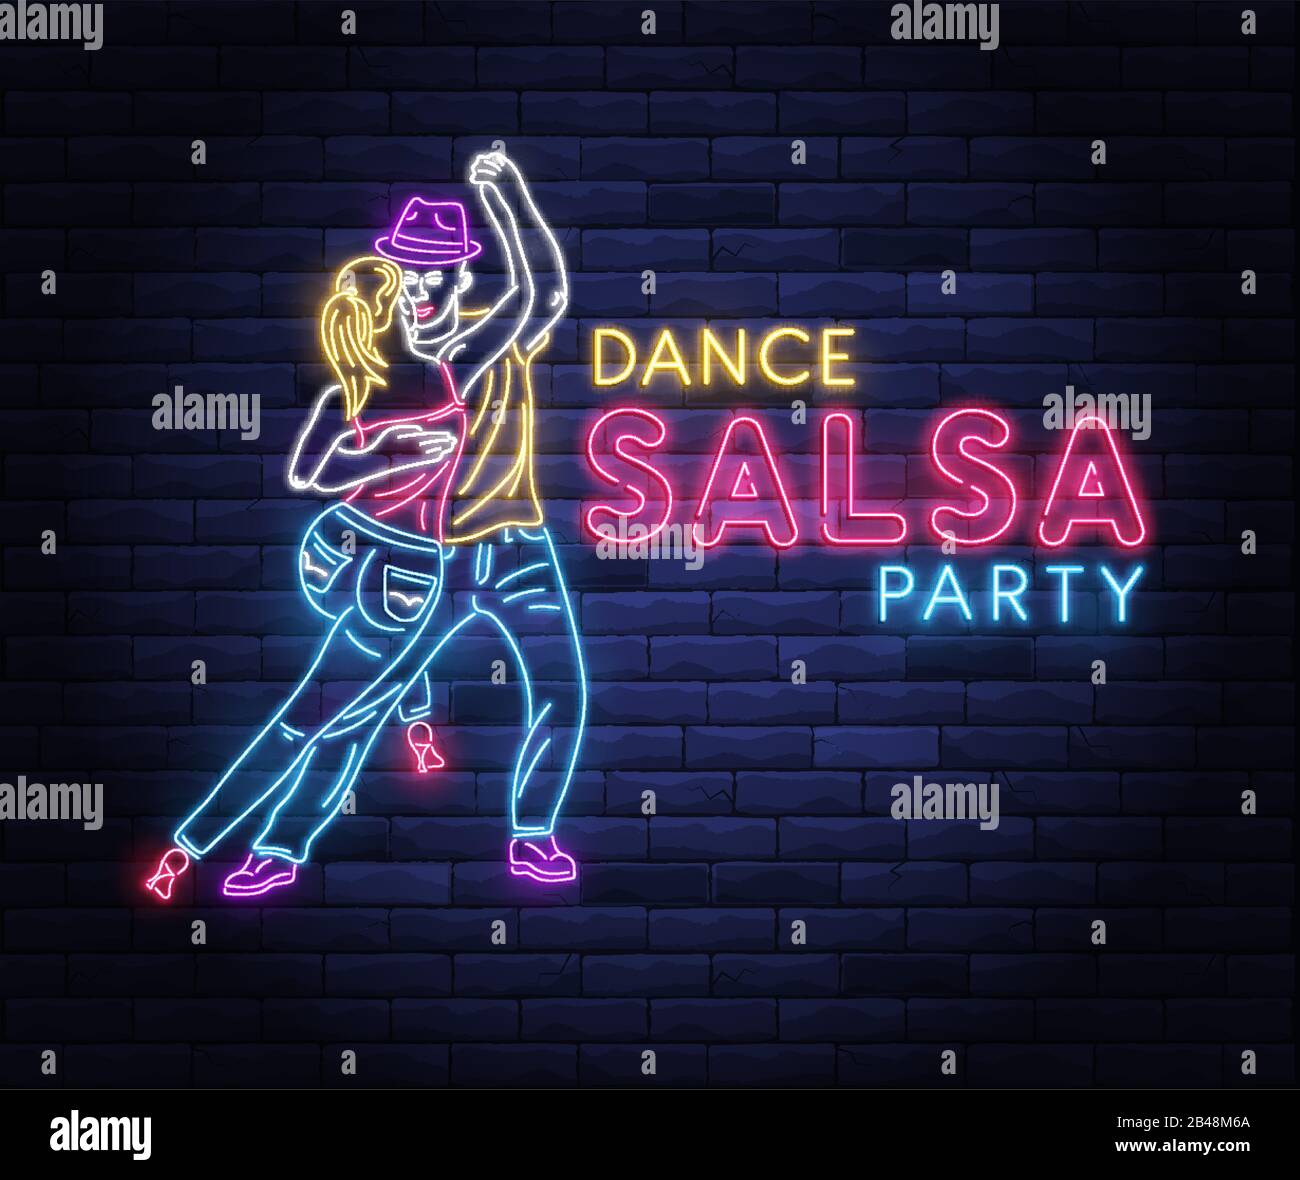 Salsa dance party colorful neon banner Stock Vector